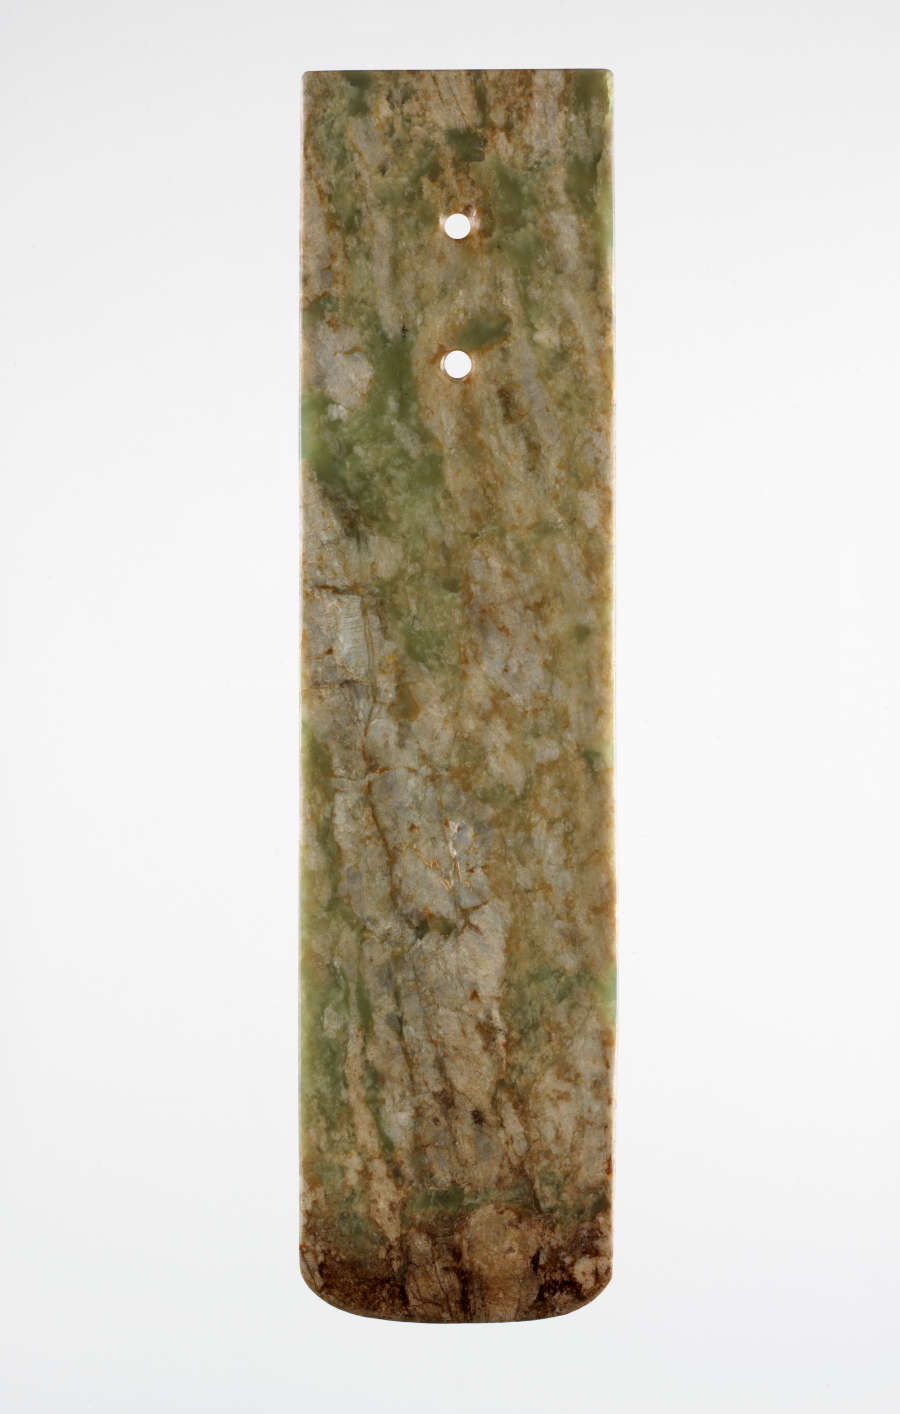 A long, rectangular stone blade with two holes punched below its top edge. The bottom edge is slightly rounded. The blade is a smooth, marbled green and brown texture.